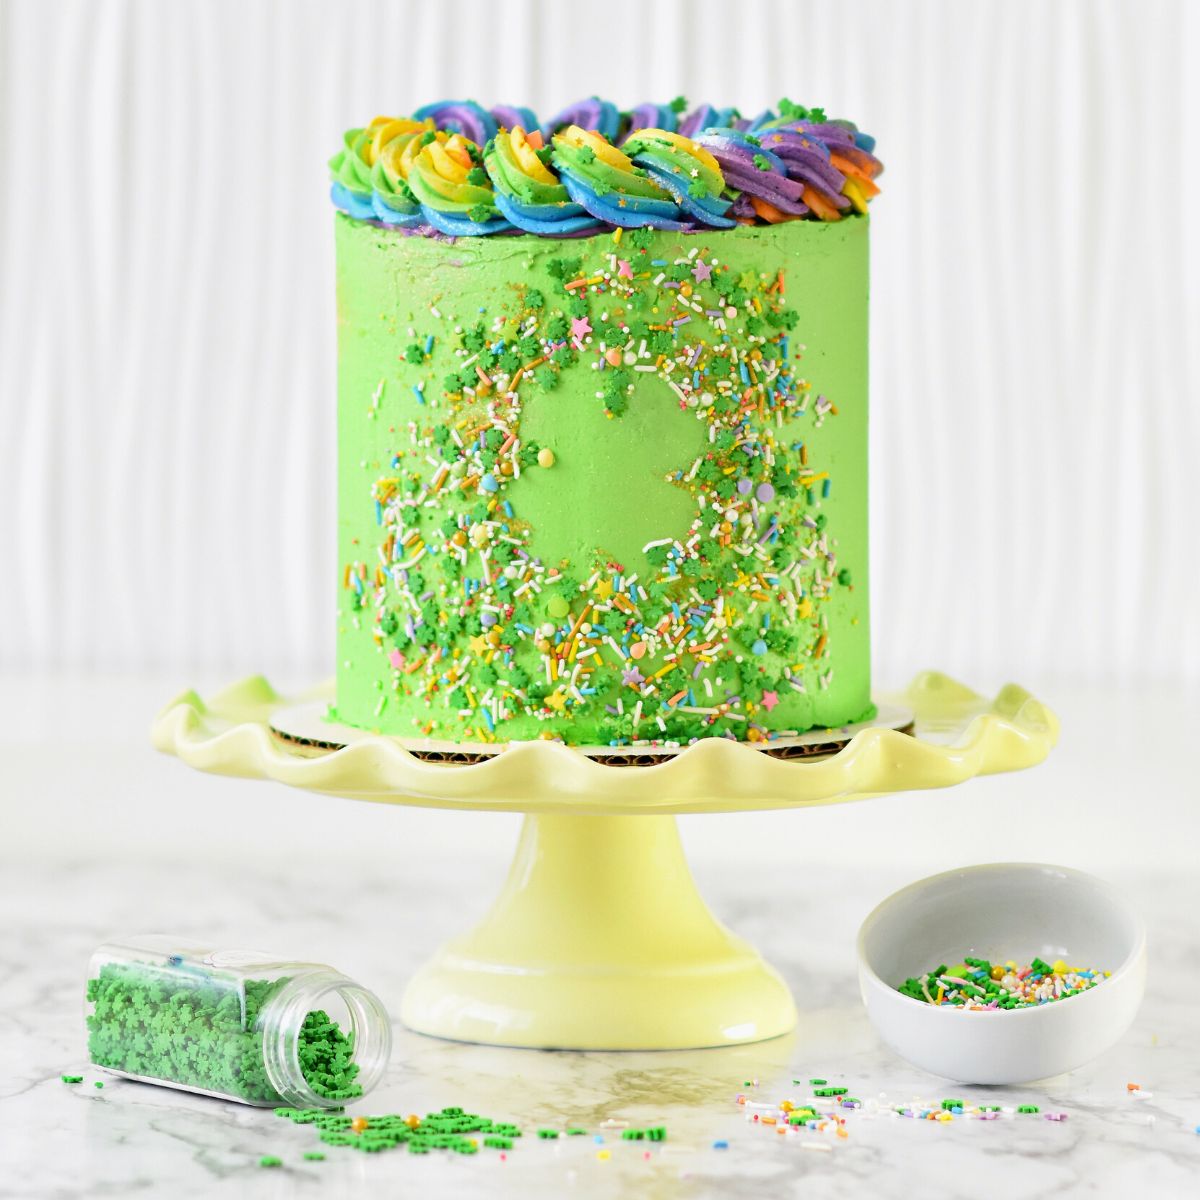 A green cake with rainbow frosting and green sprinkles on a cake stand.